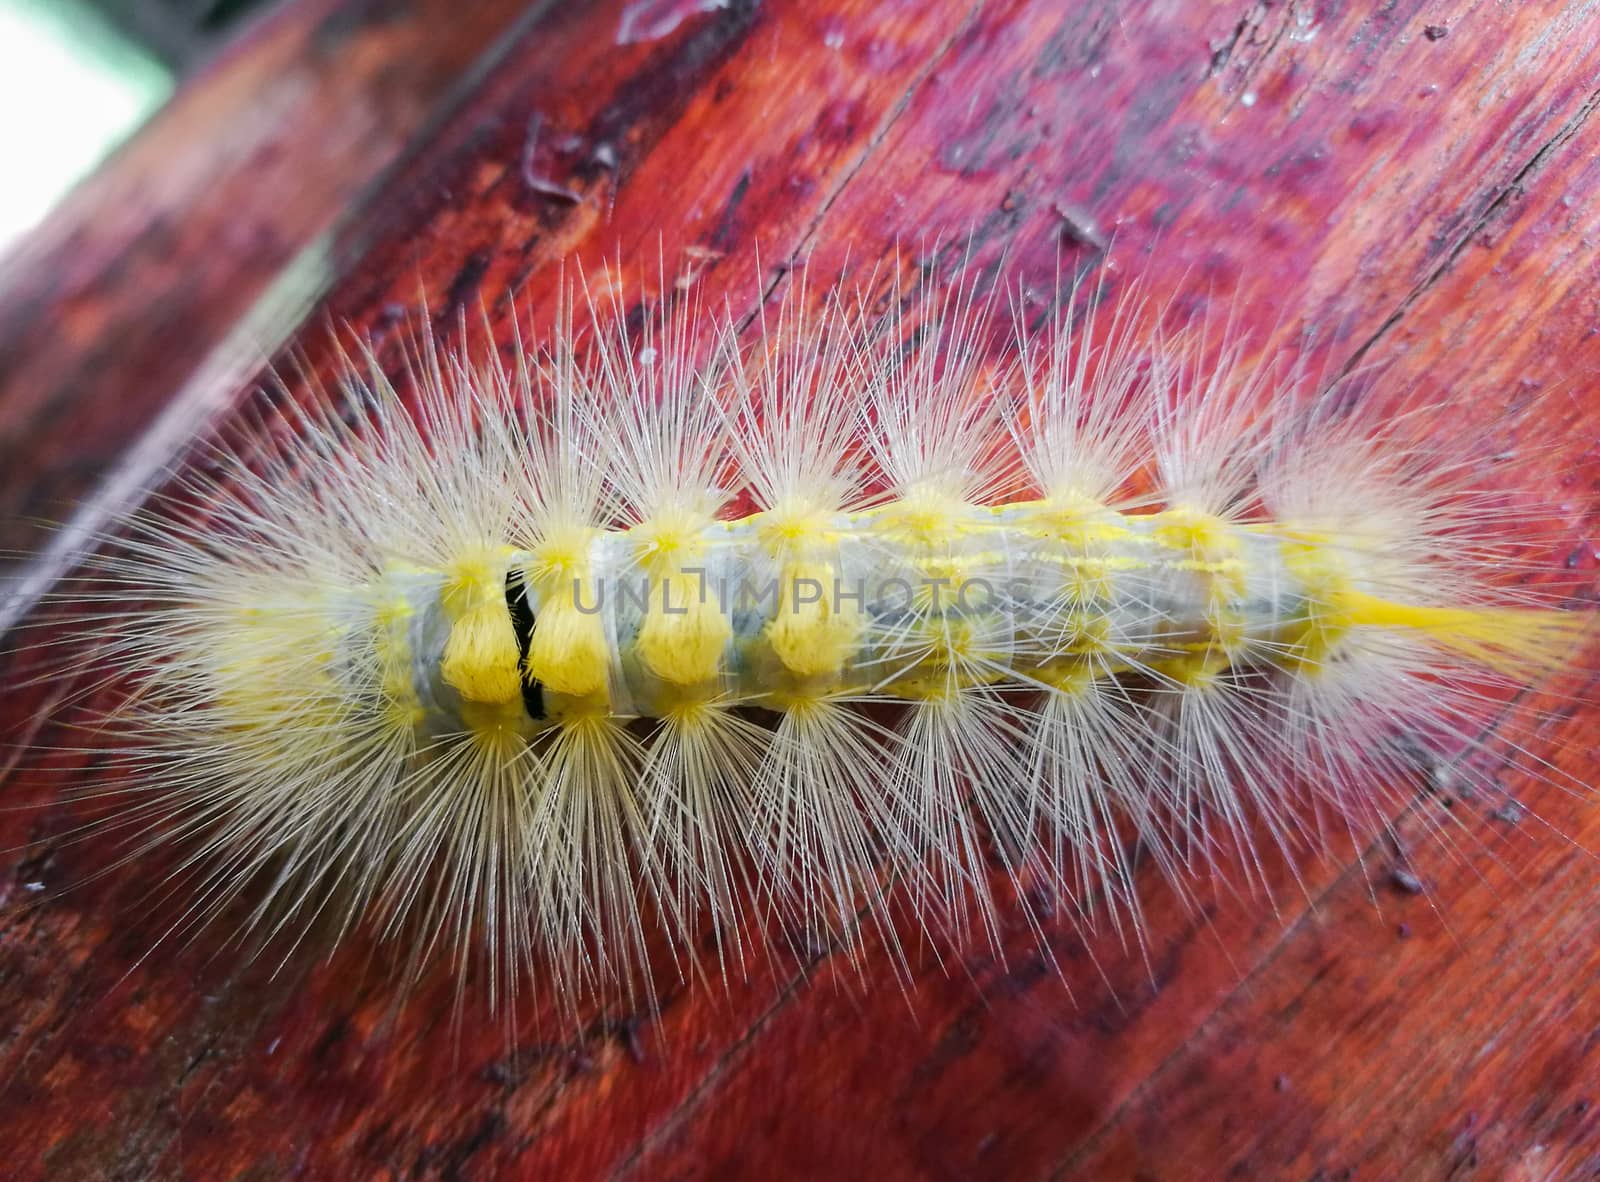 Closeup of the yellow caterpillar on wooden pole